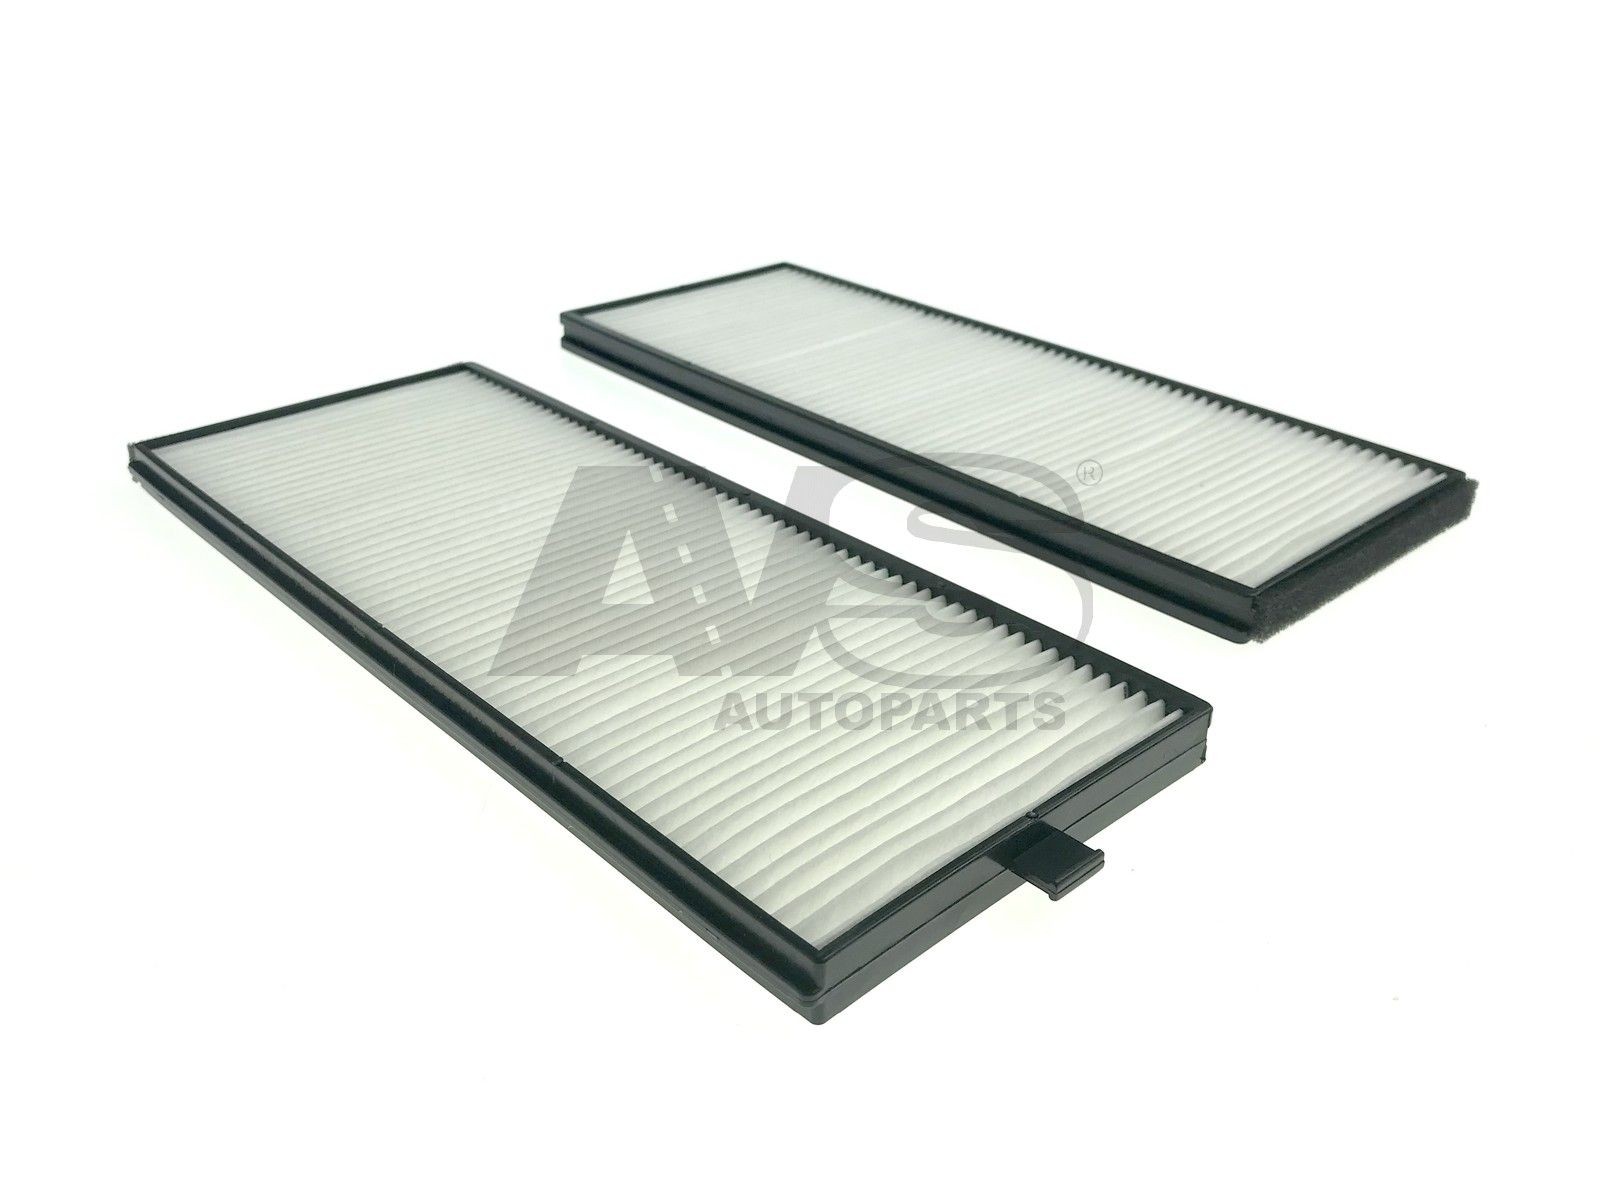 AVS AUTOPARTS Particulate Filter, 251 mm x 100 mm x 12 mm Width: 100mm, Height: 12mm, Length: 251mm Cabin filter HB583-2 buy